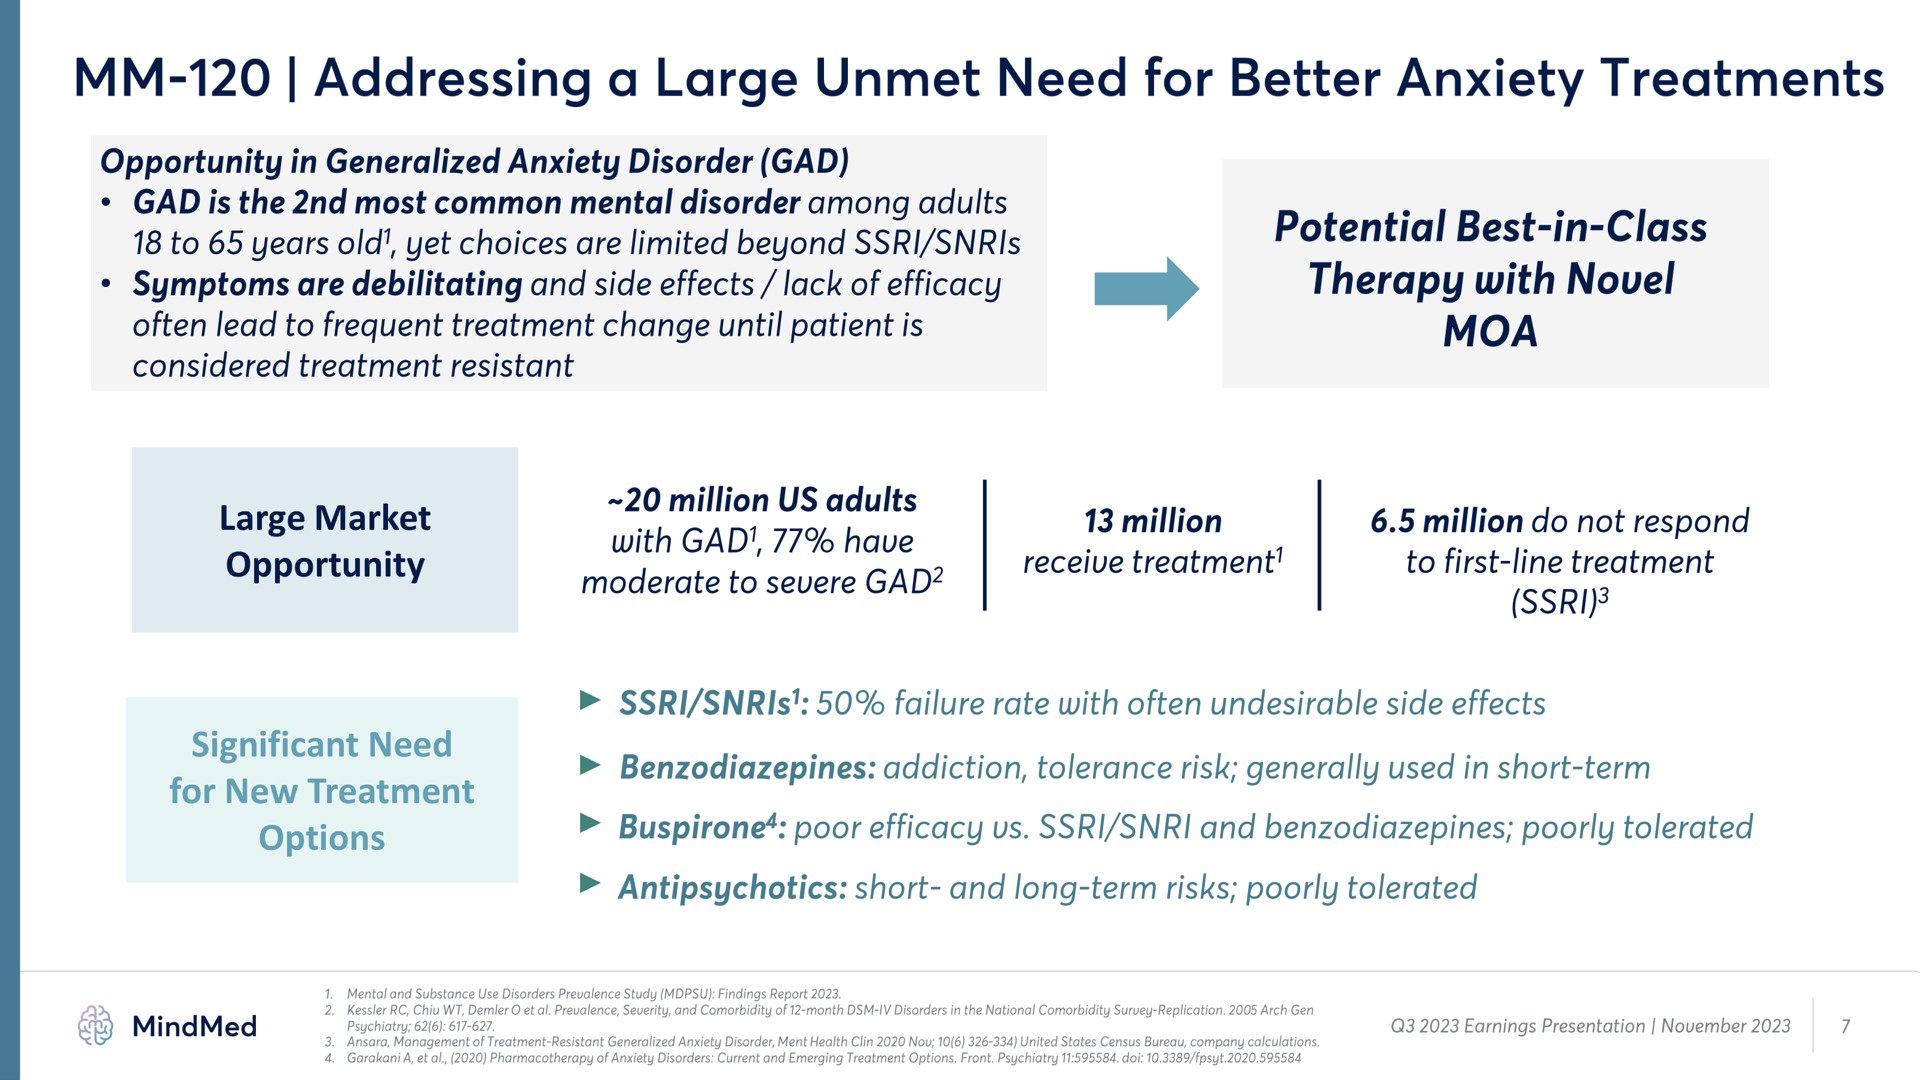 large market opportunity significant need for new treatment options addressing a unmet better anxiety treatments | MindMed